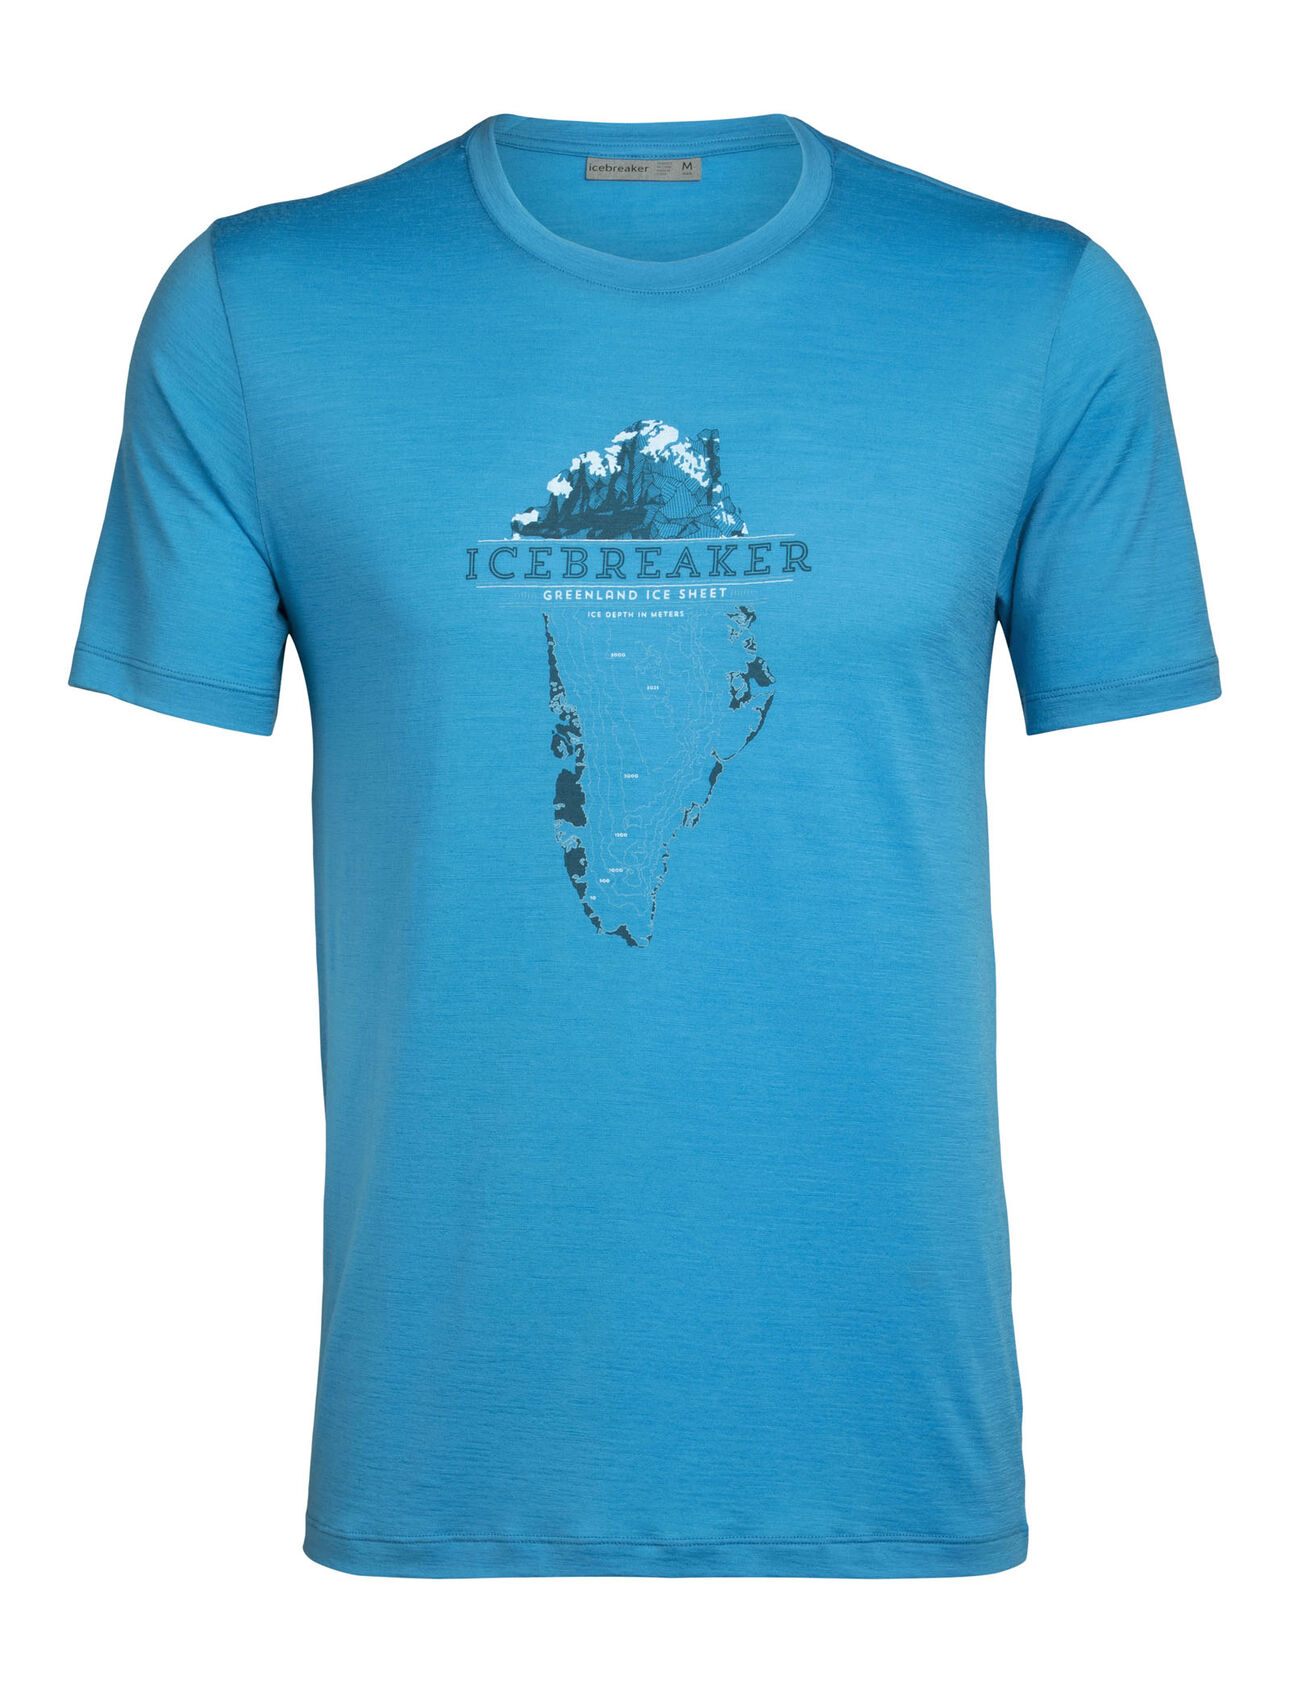 Mens Merino Tech Lite Short Sleeve Crewe T-Shirt Greenland Crest Our most versatile tech tee, in breathable, odor-resistant merino wool with a slight stretch. Artist Scott Elser captures the depth of Greenland’s ice sheet, which covers 80% of Greenland and accounts for 8% of Earth’s fresh water.  